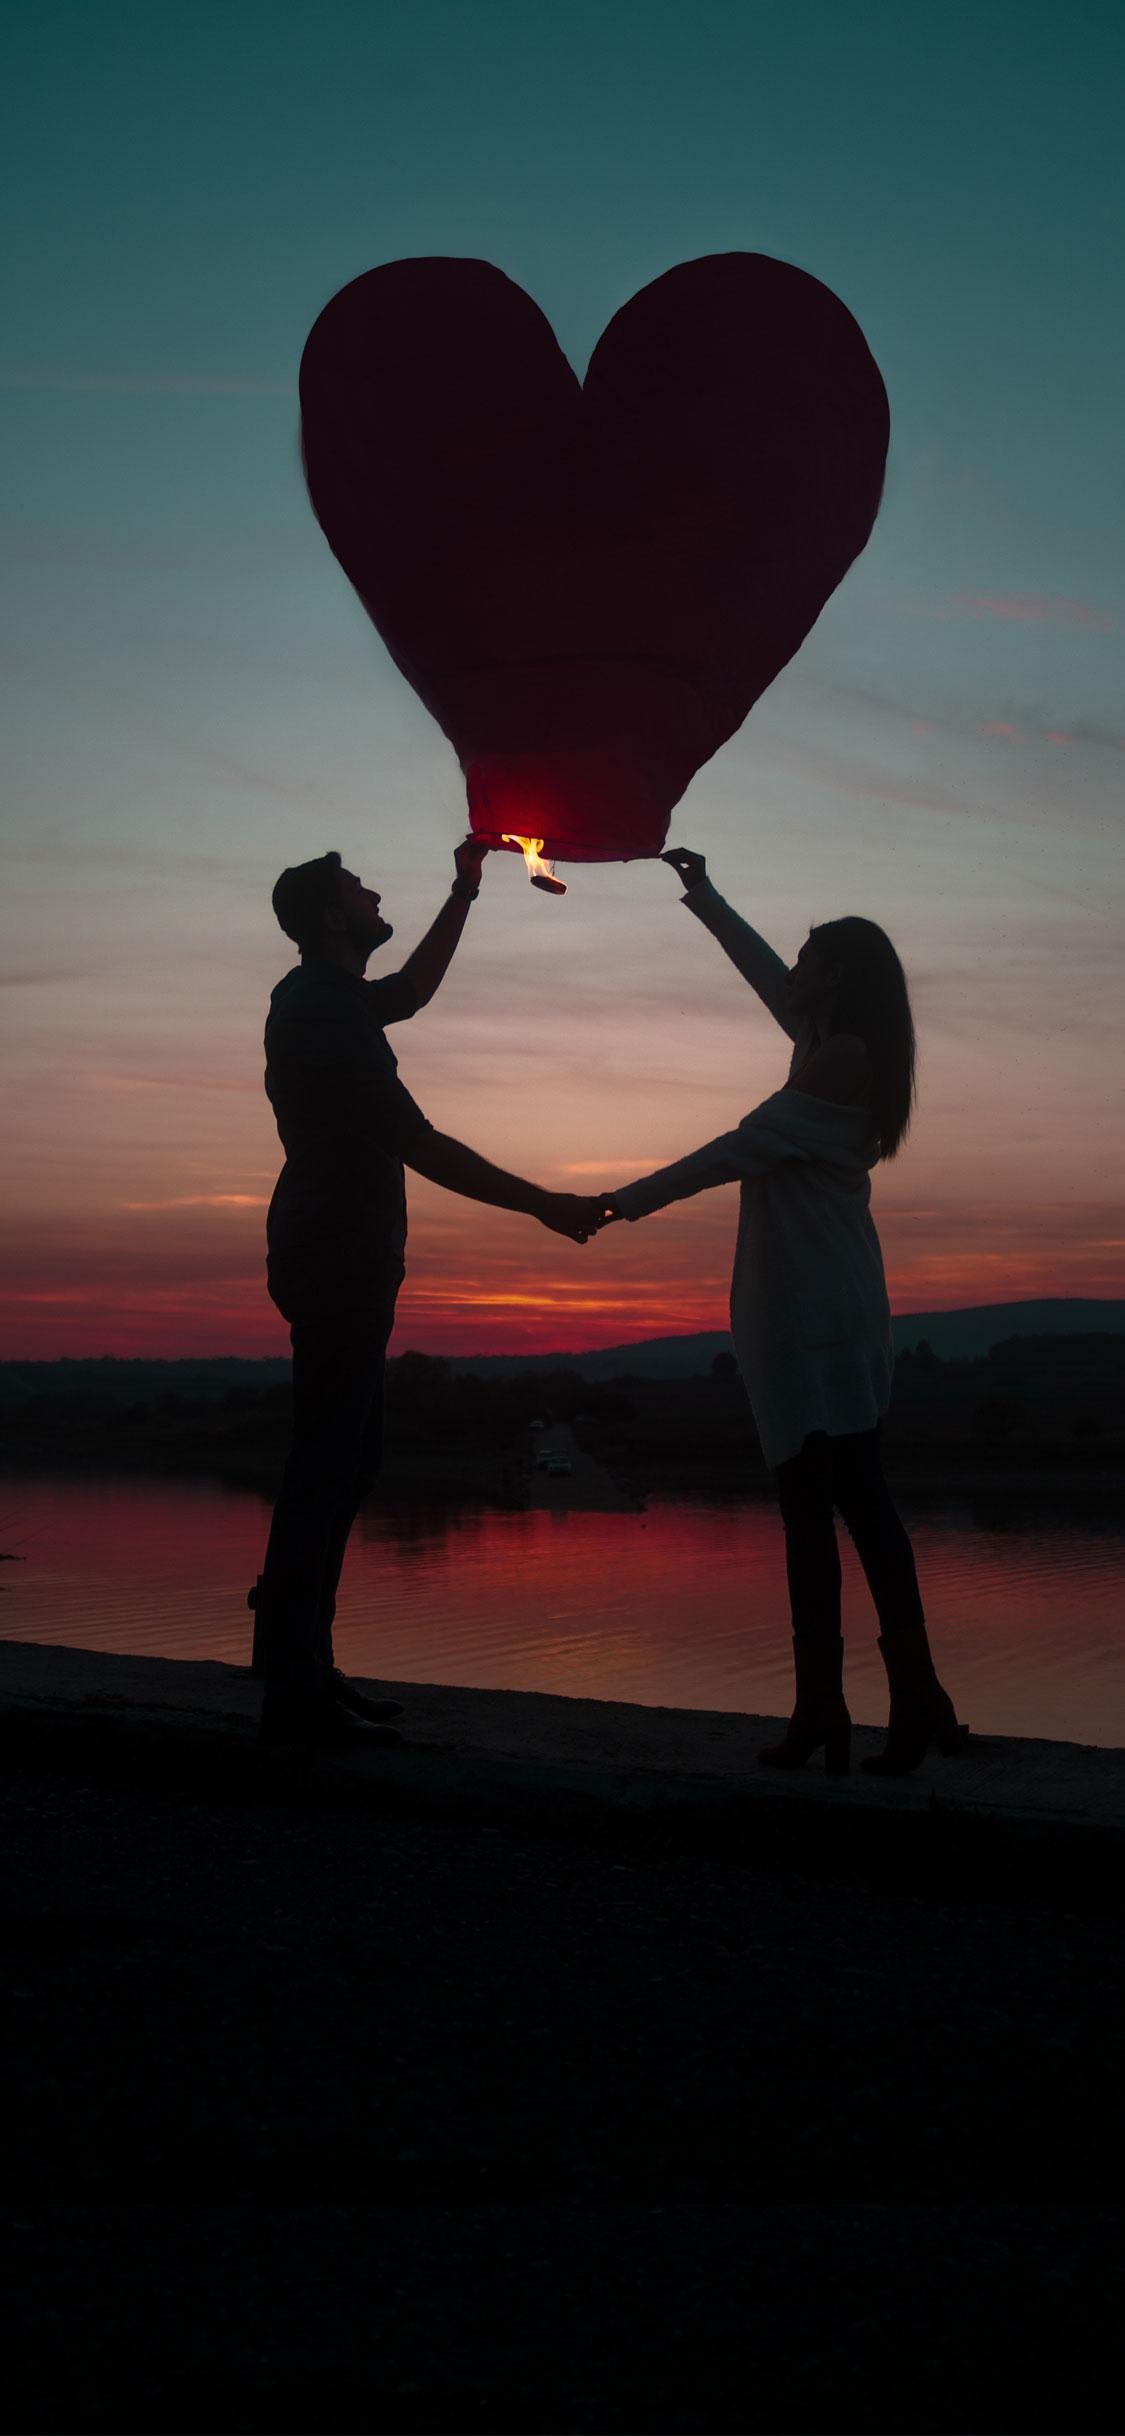 Romantic Couple With Heart Shaped Lantern